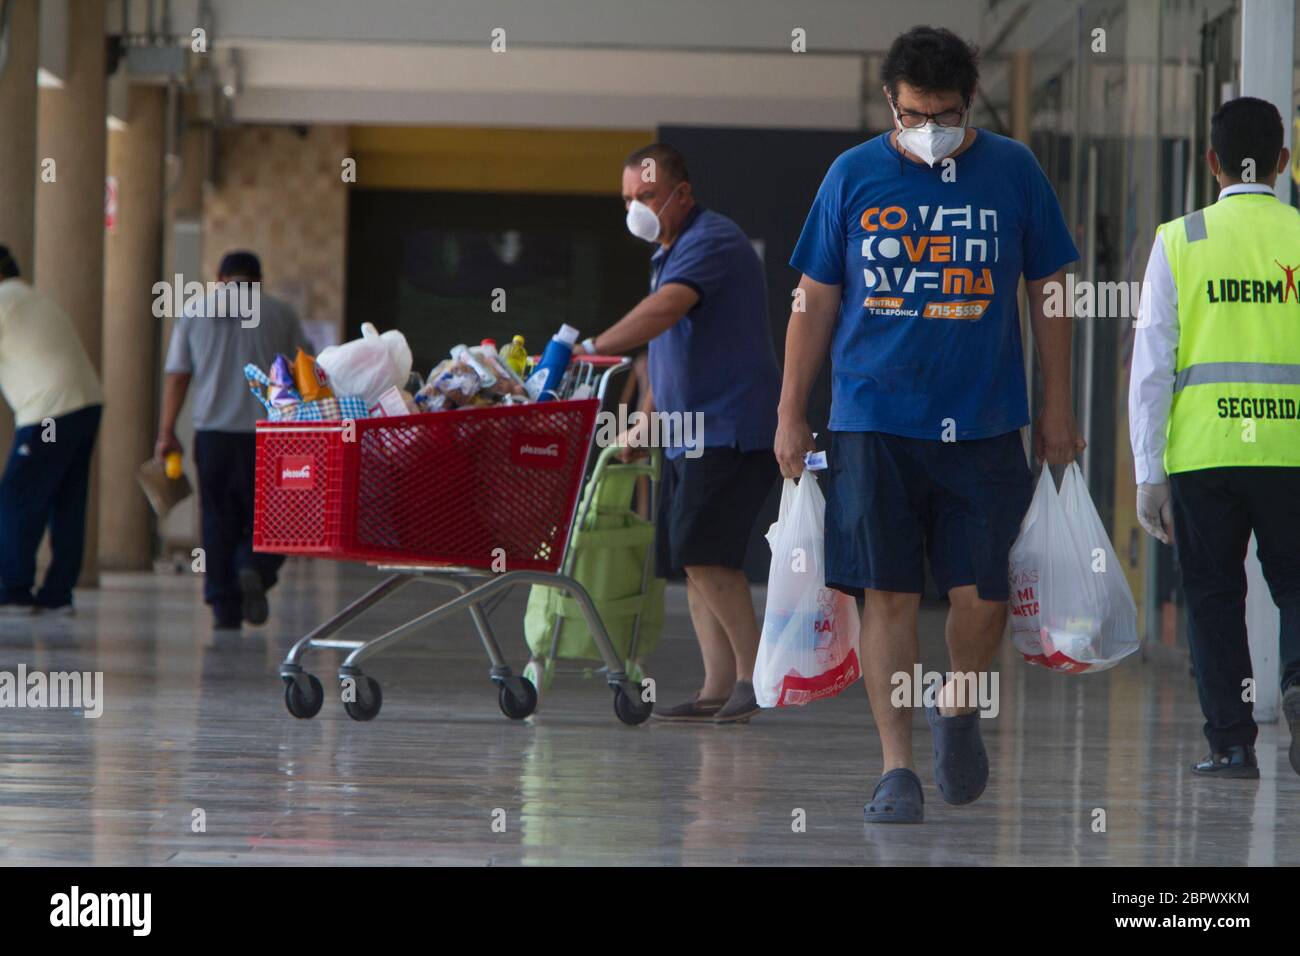 A man wearing a mask carries bags of groceries from the supermarket during the national state of mandatory quarantine as a response to the COVID-19 pandemic in Lima, Peru. Since the installment of the measure back in March the government have struggled to stop the spread of the virus especially in public areas such as markets. 33,931 people have been infected and 943 have died as of April 29, 2020. Stock Photo